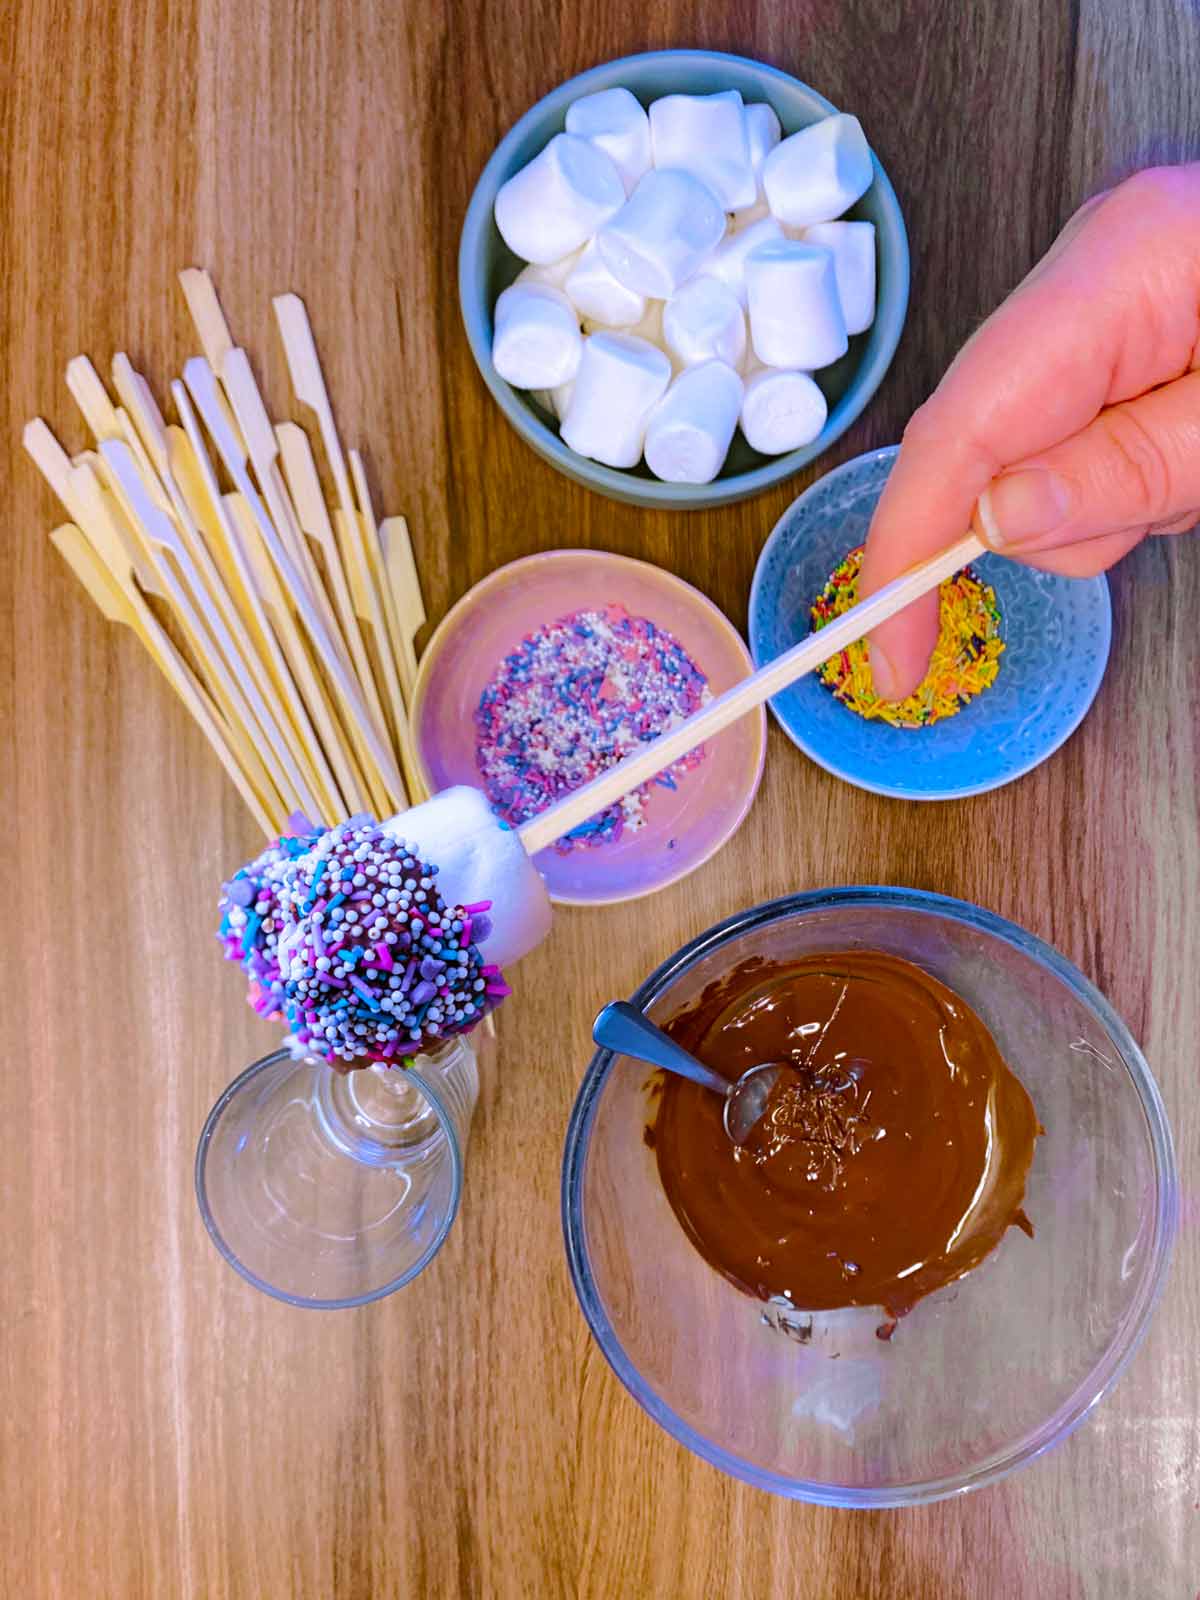 A marshmallow that has been dipped in chocolate and sprinkles.